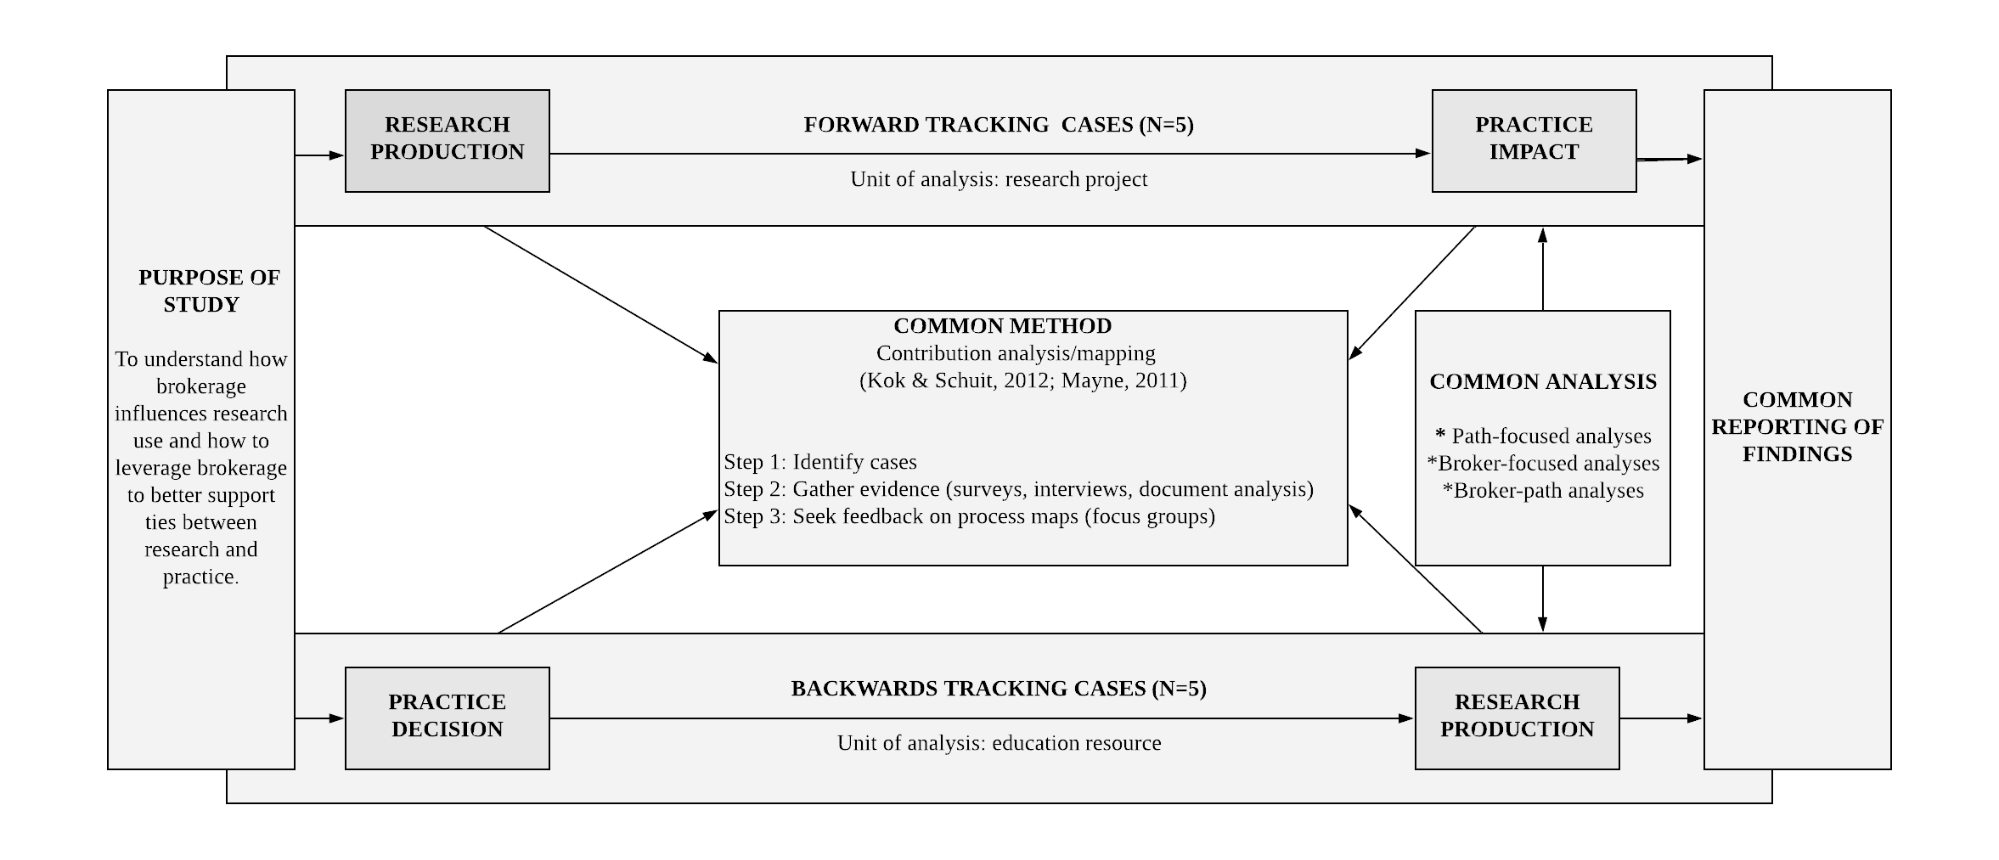 A flow chart depicting the relationship between forward and backward tracking cases